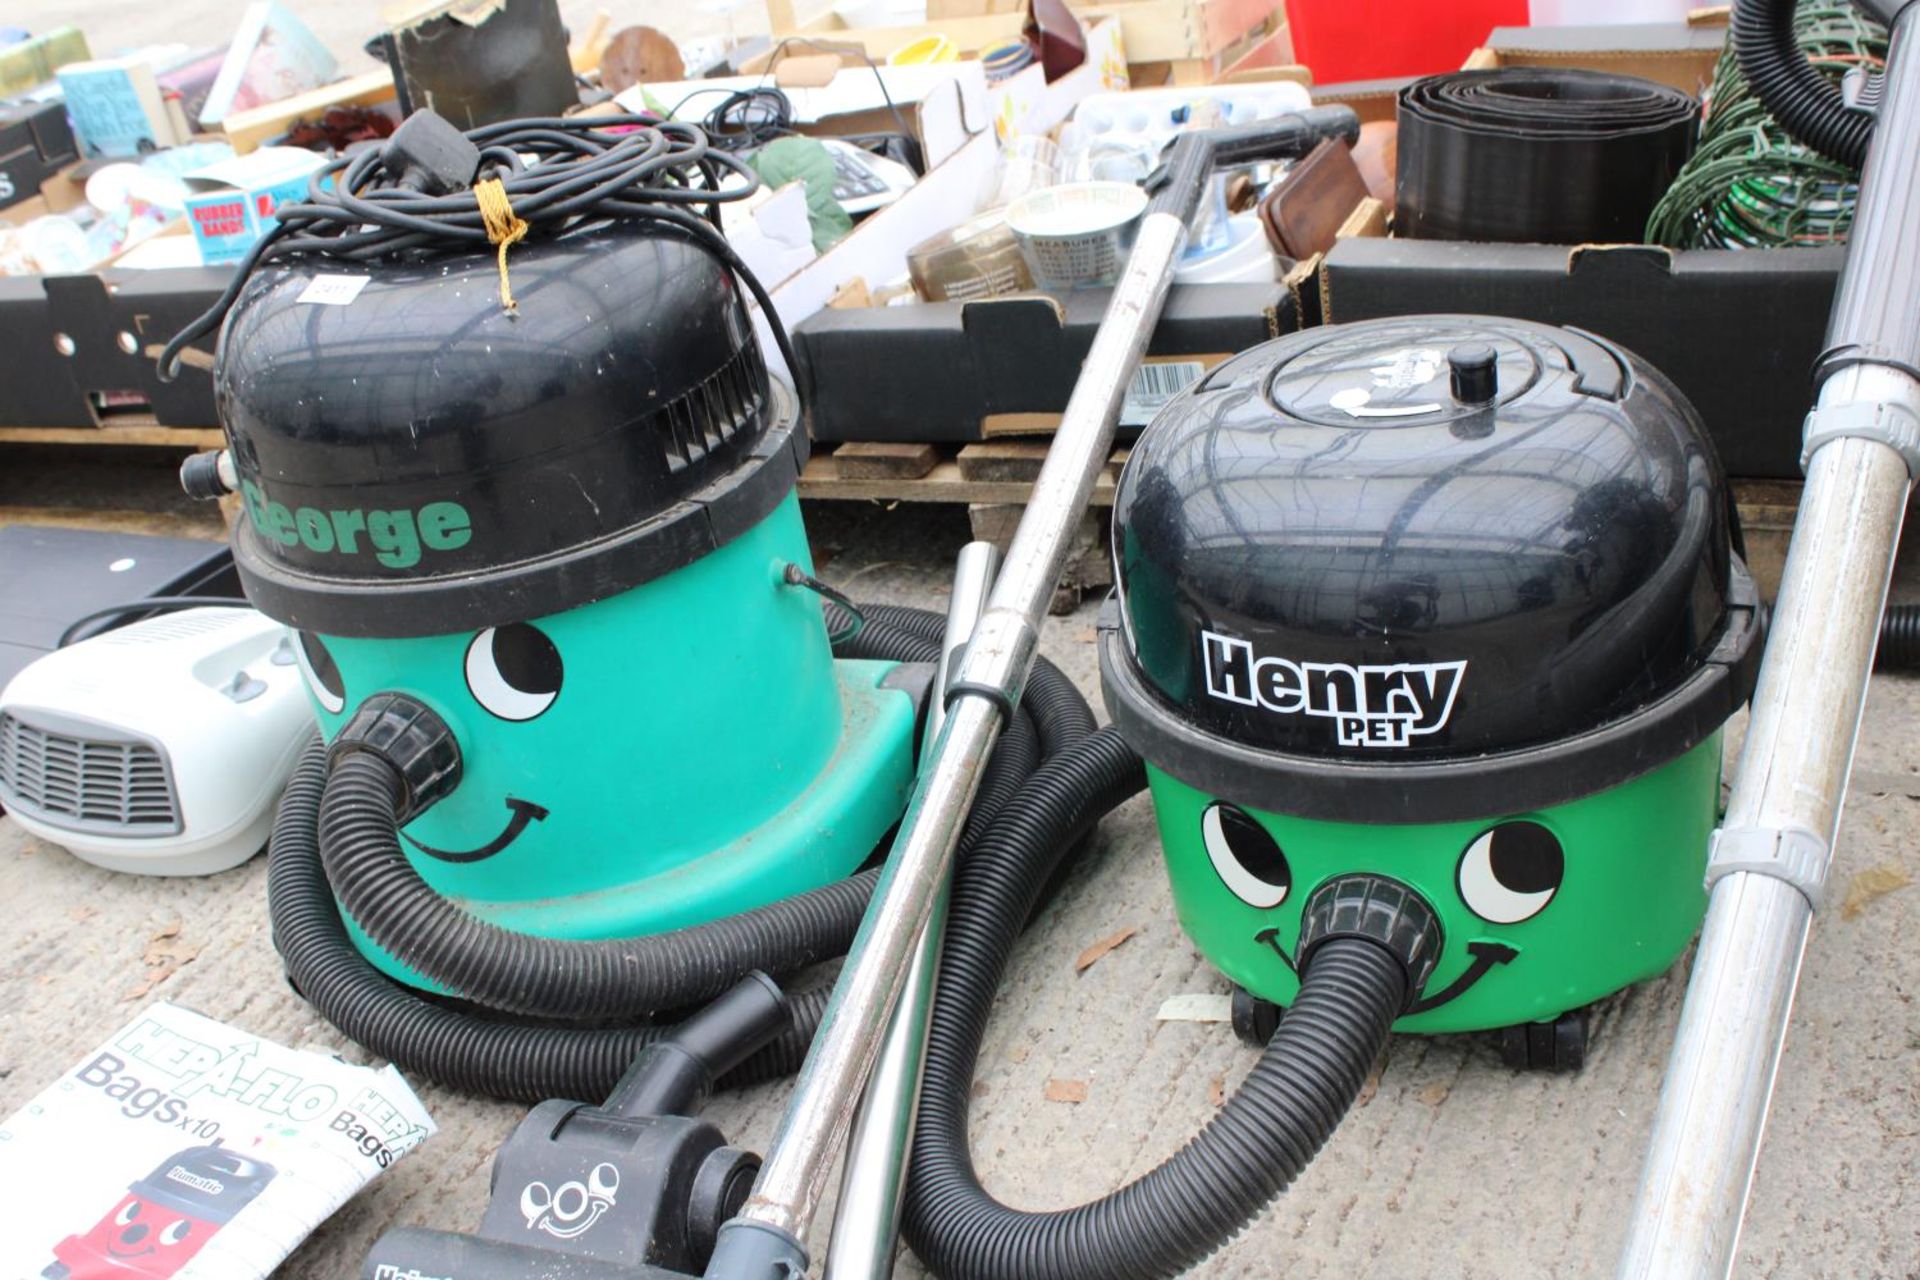 A HENRY PET VACUUM AND A FURTHER GEORGE VACUUM CLEANER - Image 3 of 3